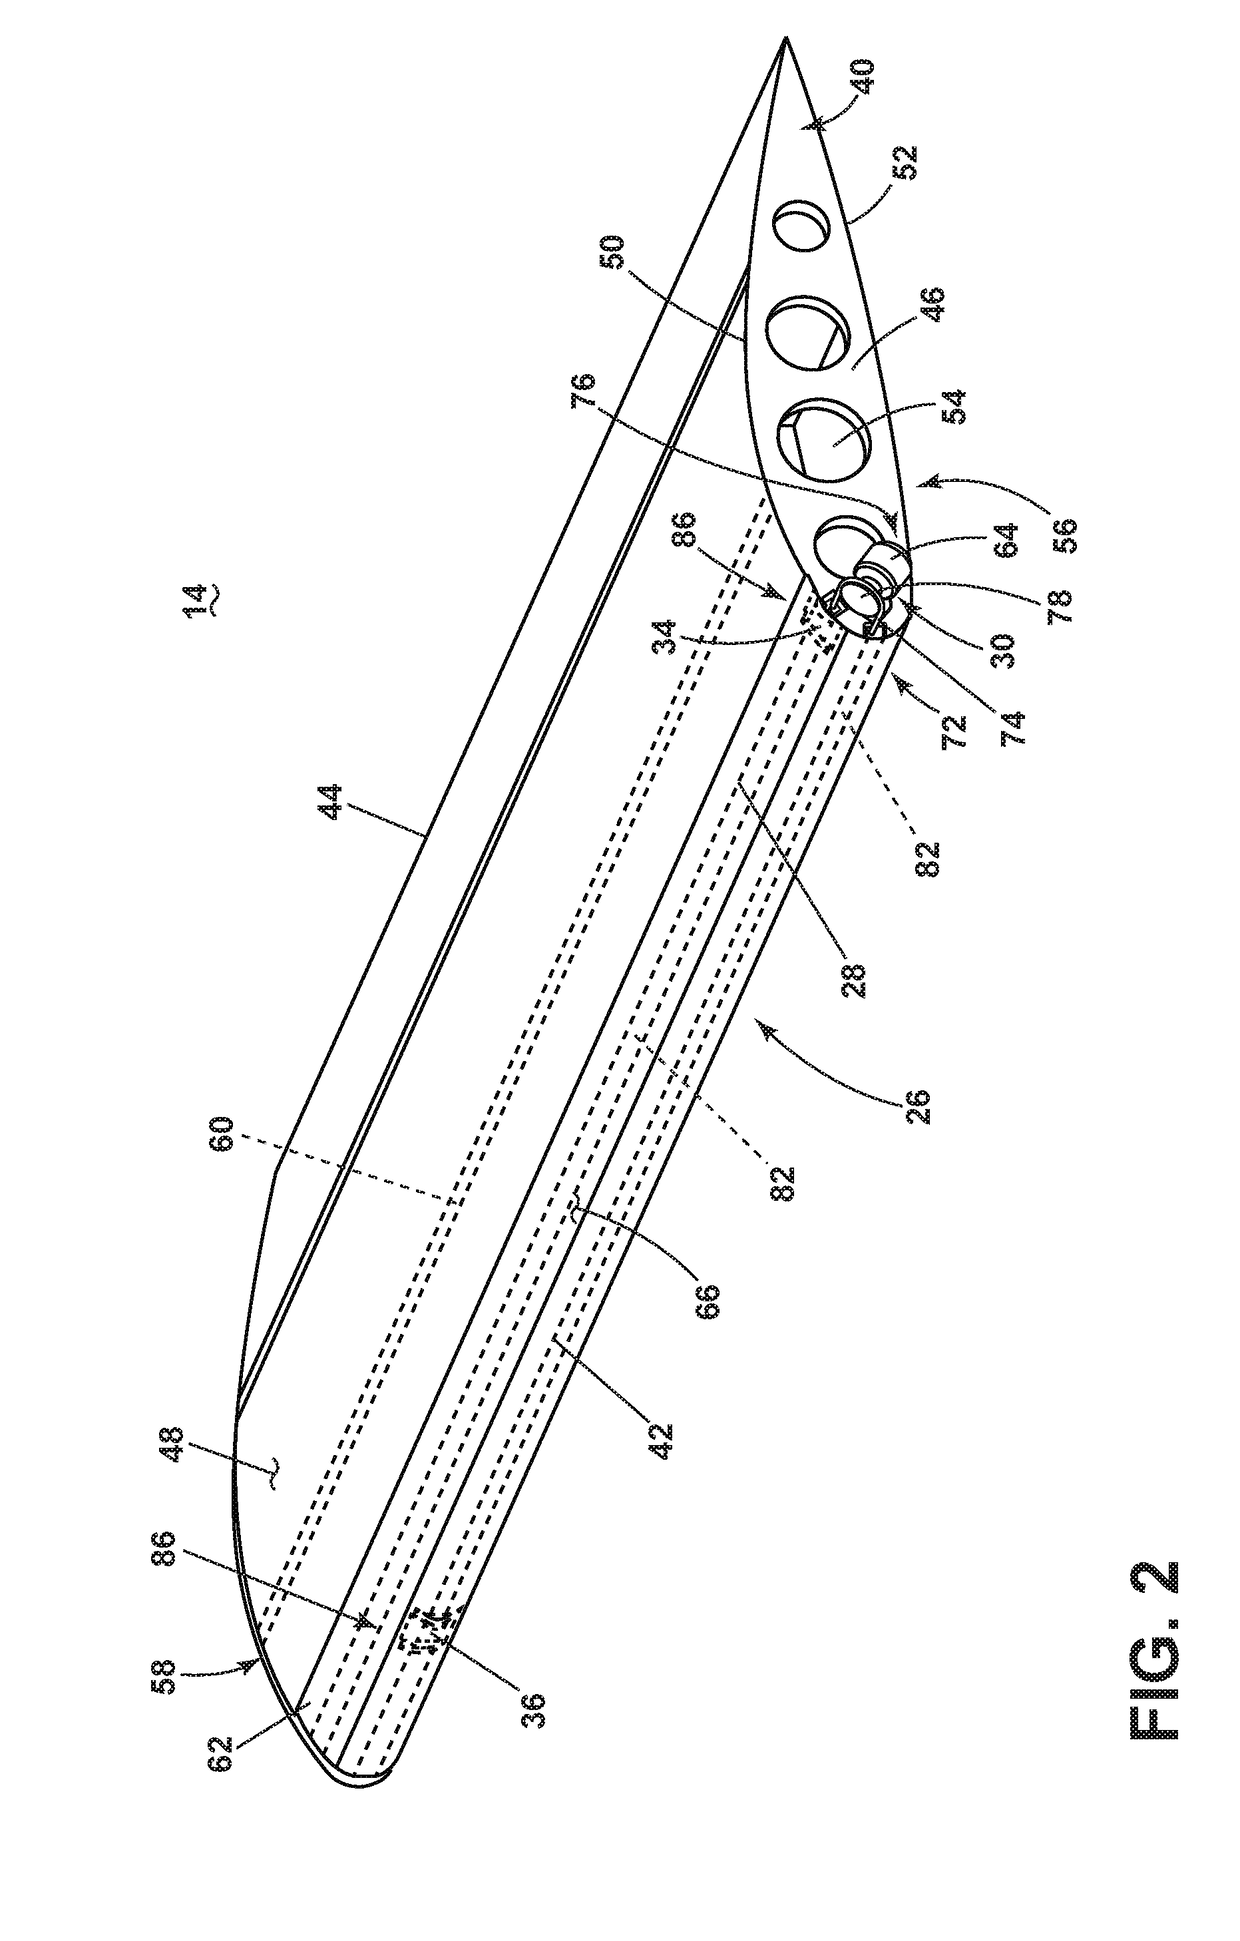 Deicing module for an aircraft and method for deicing